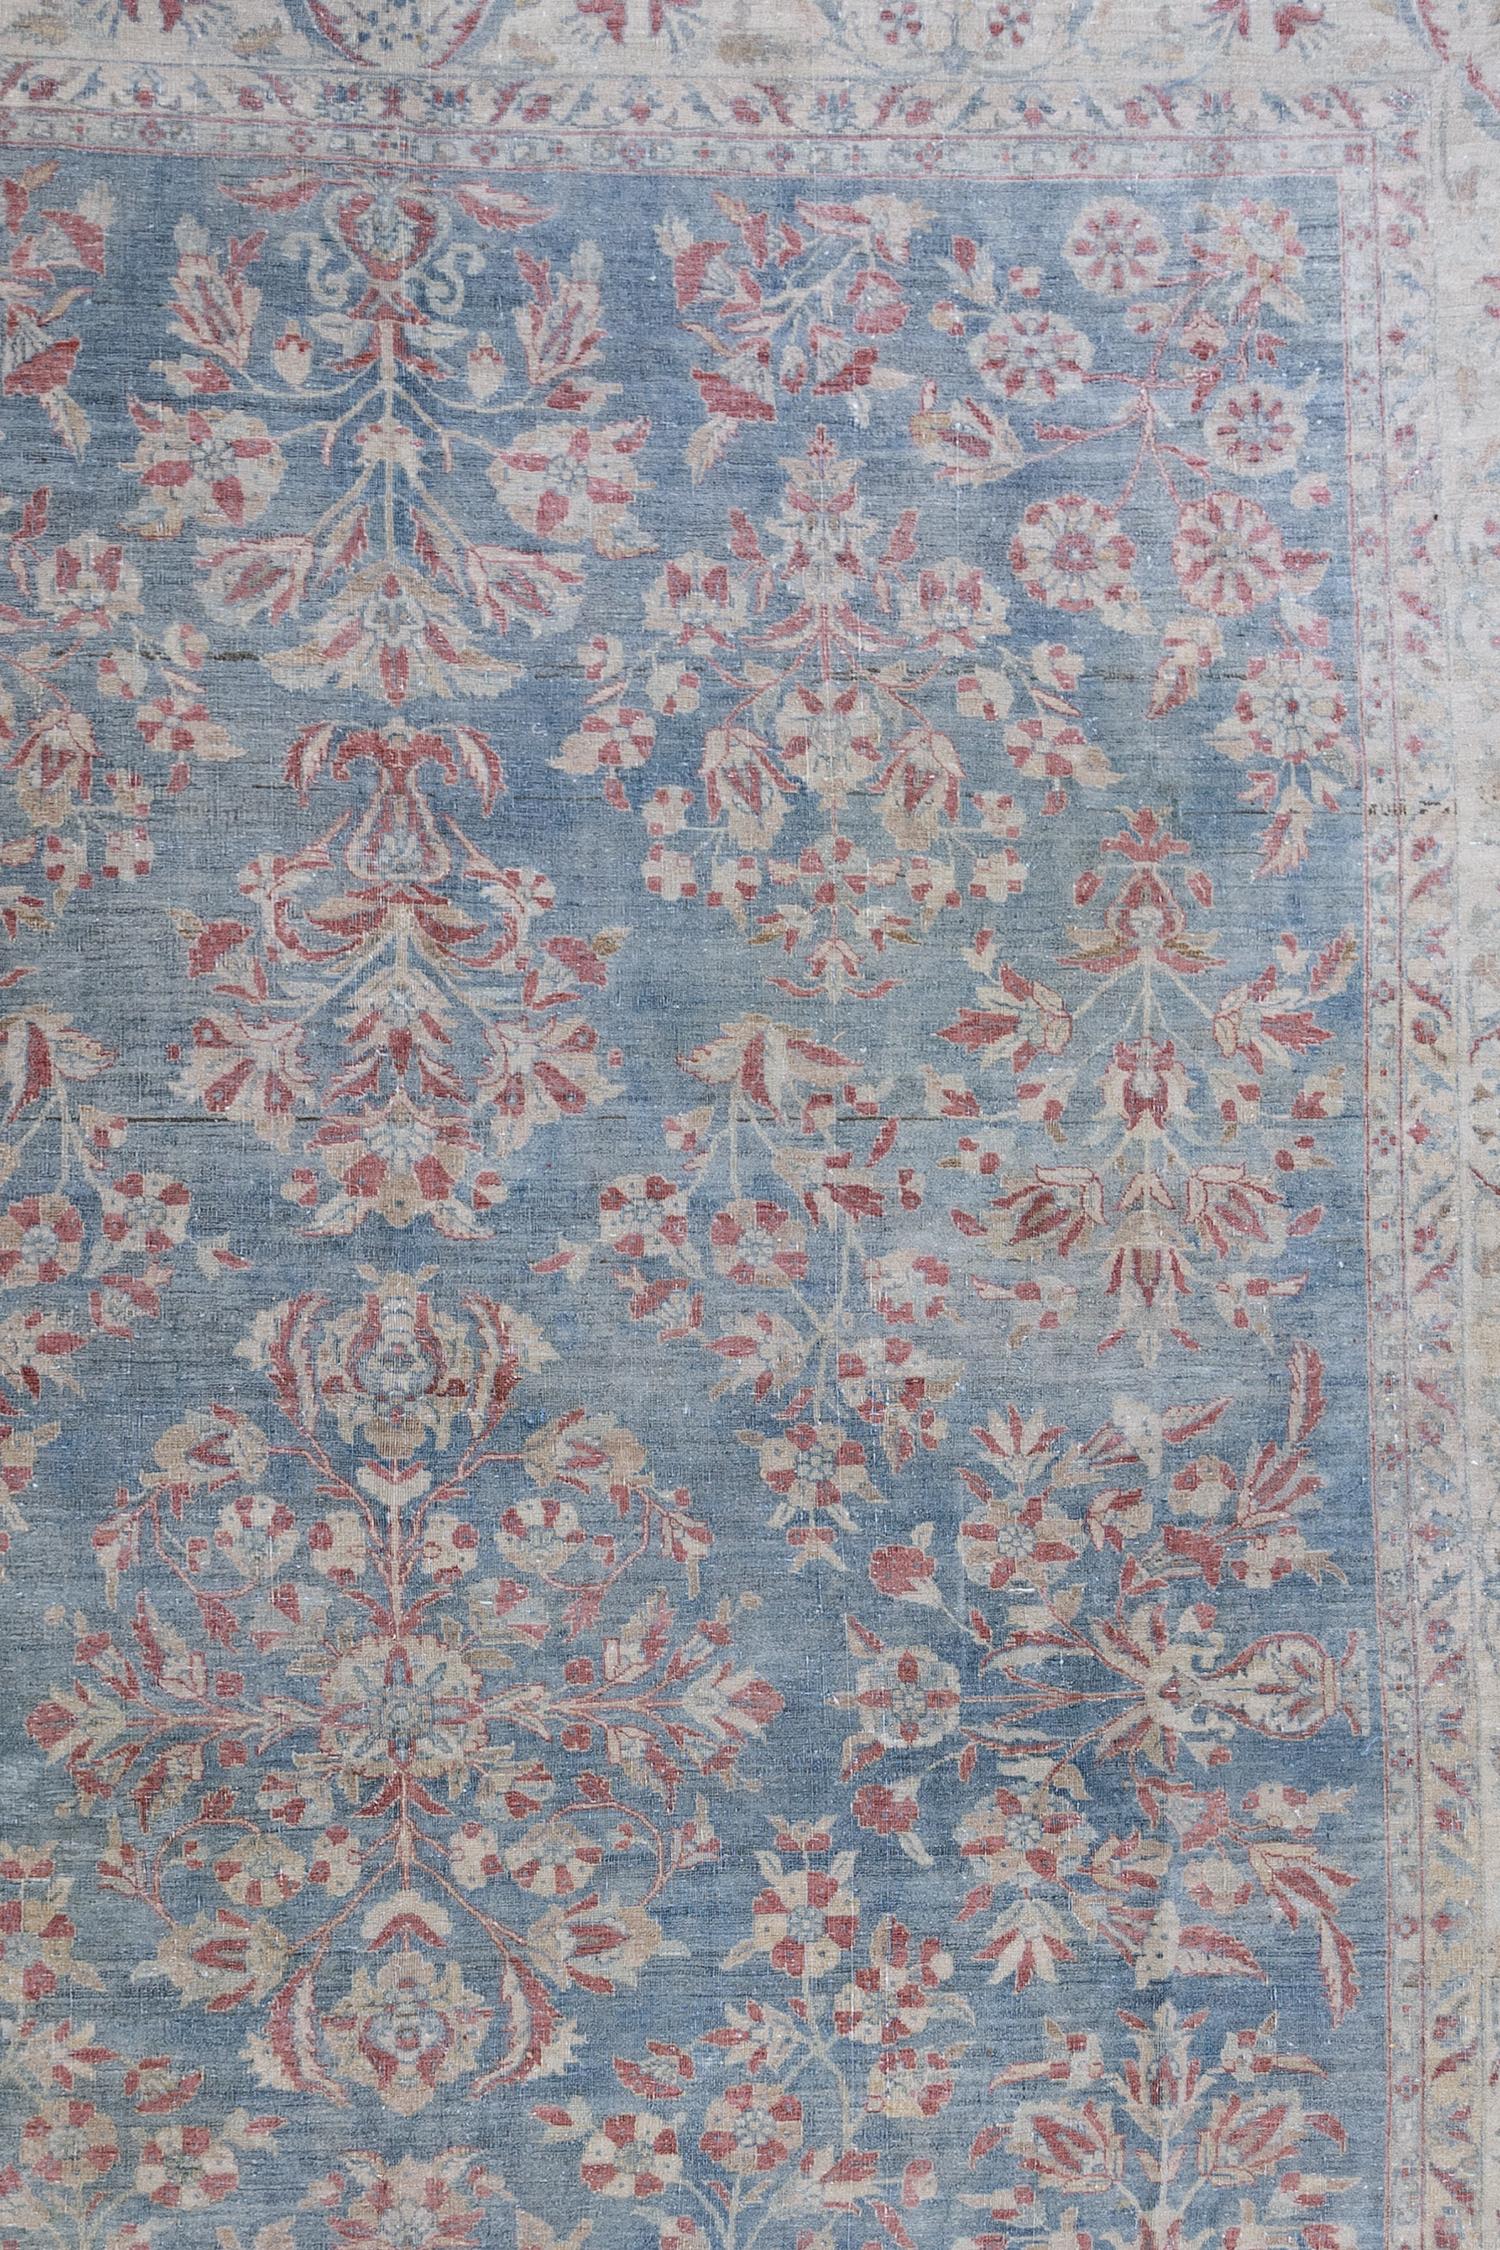 Age: Circa 1930

Colors: Blue, red, cream, tan

Pile: low

Wear Notes: 2

Material: Wool on cotton 

Vintage rugs are made by hand over the course of months, sometimes years. Their imperfections and wear are evidence of the hard working human hands